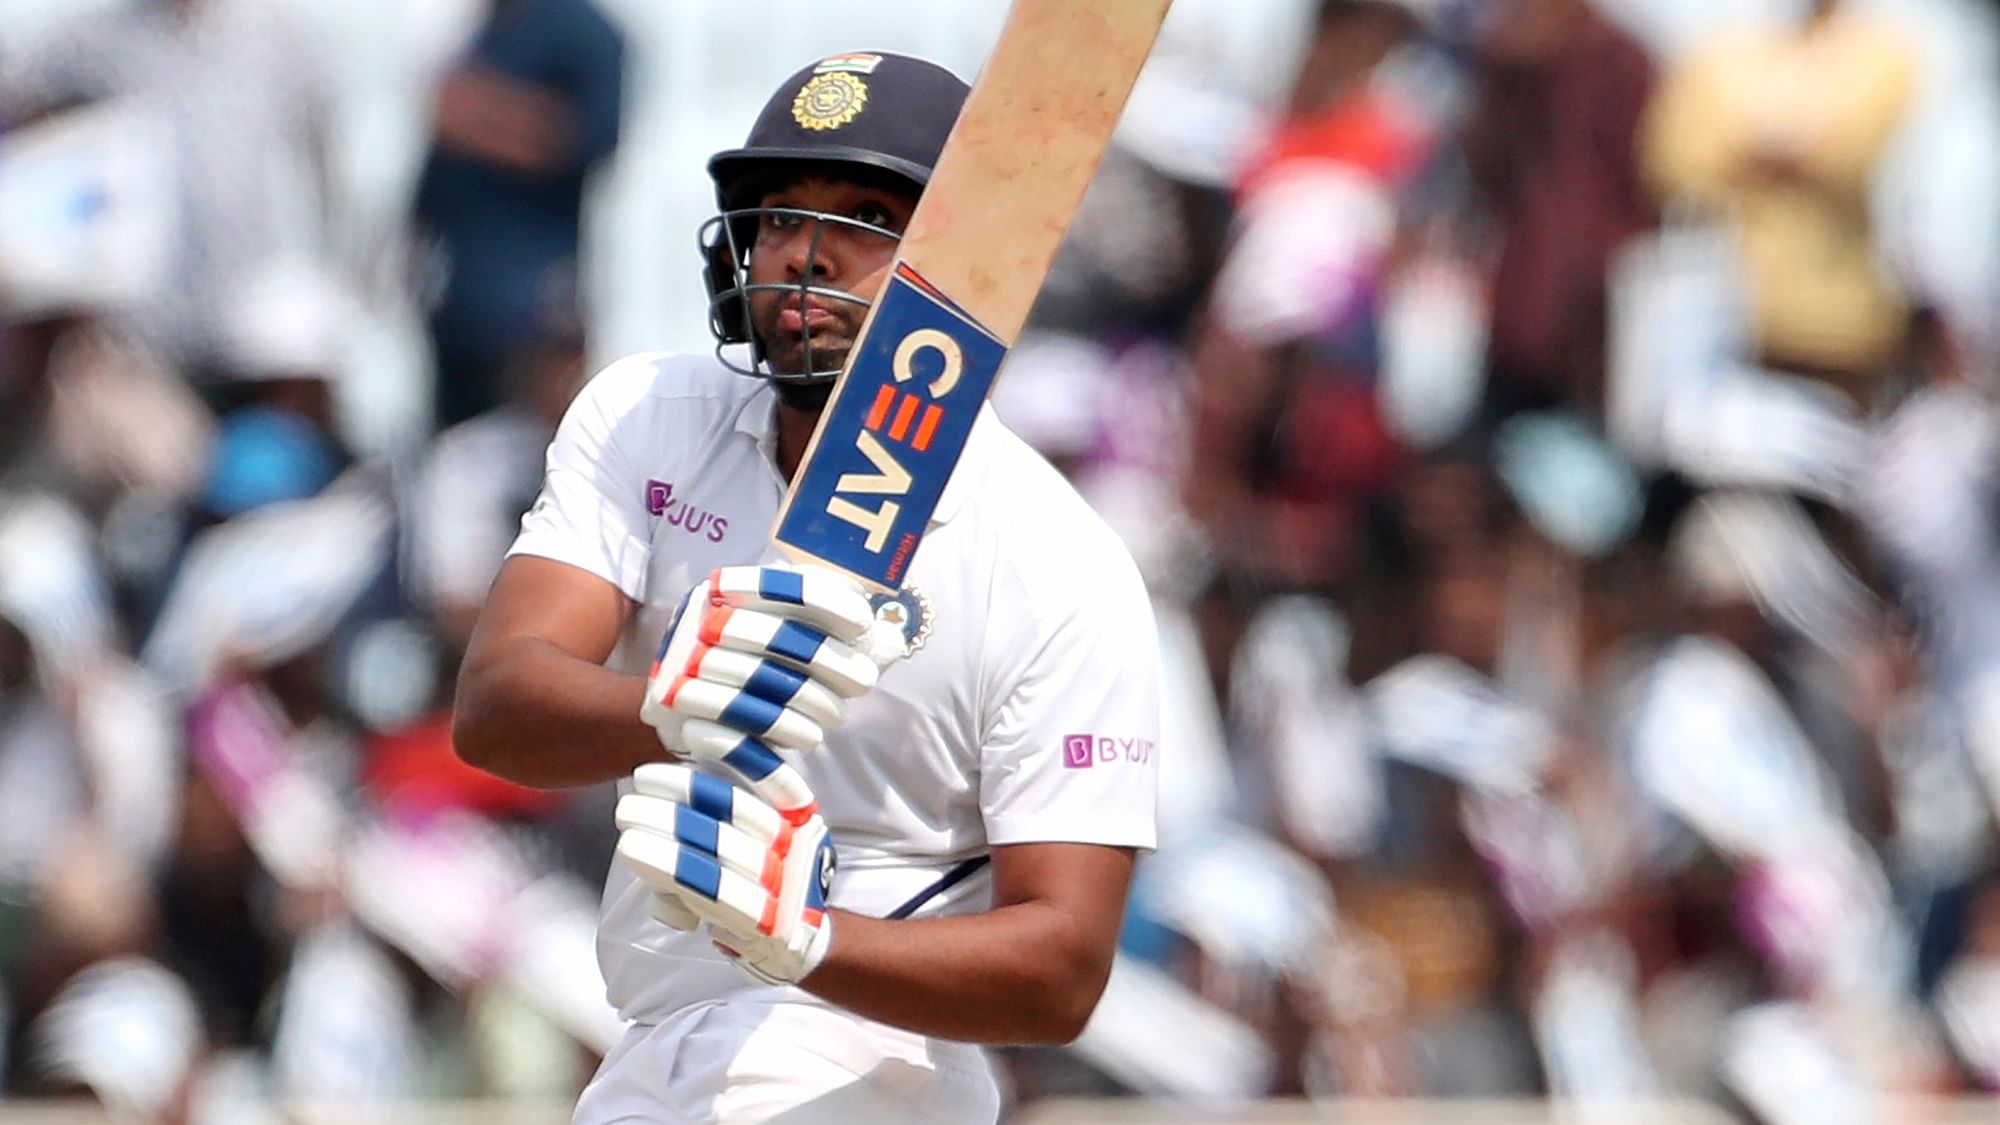 On Saturday, Rohit Sharma smashed his sixth Test hundred during the third and final Test against Proteas.